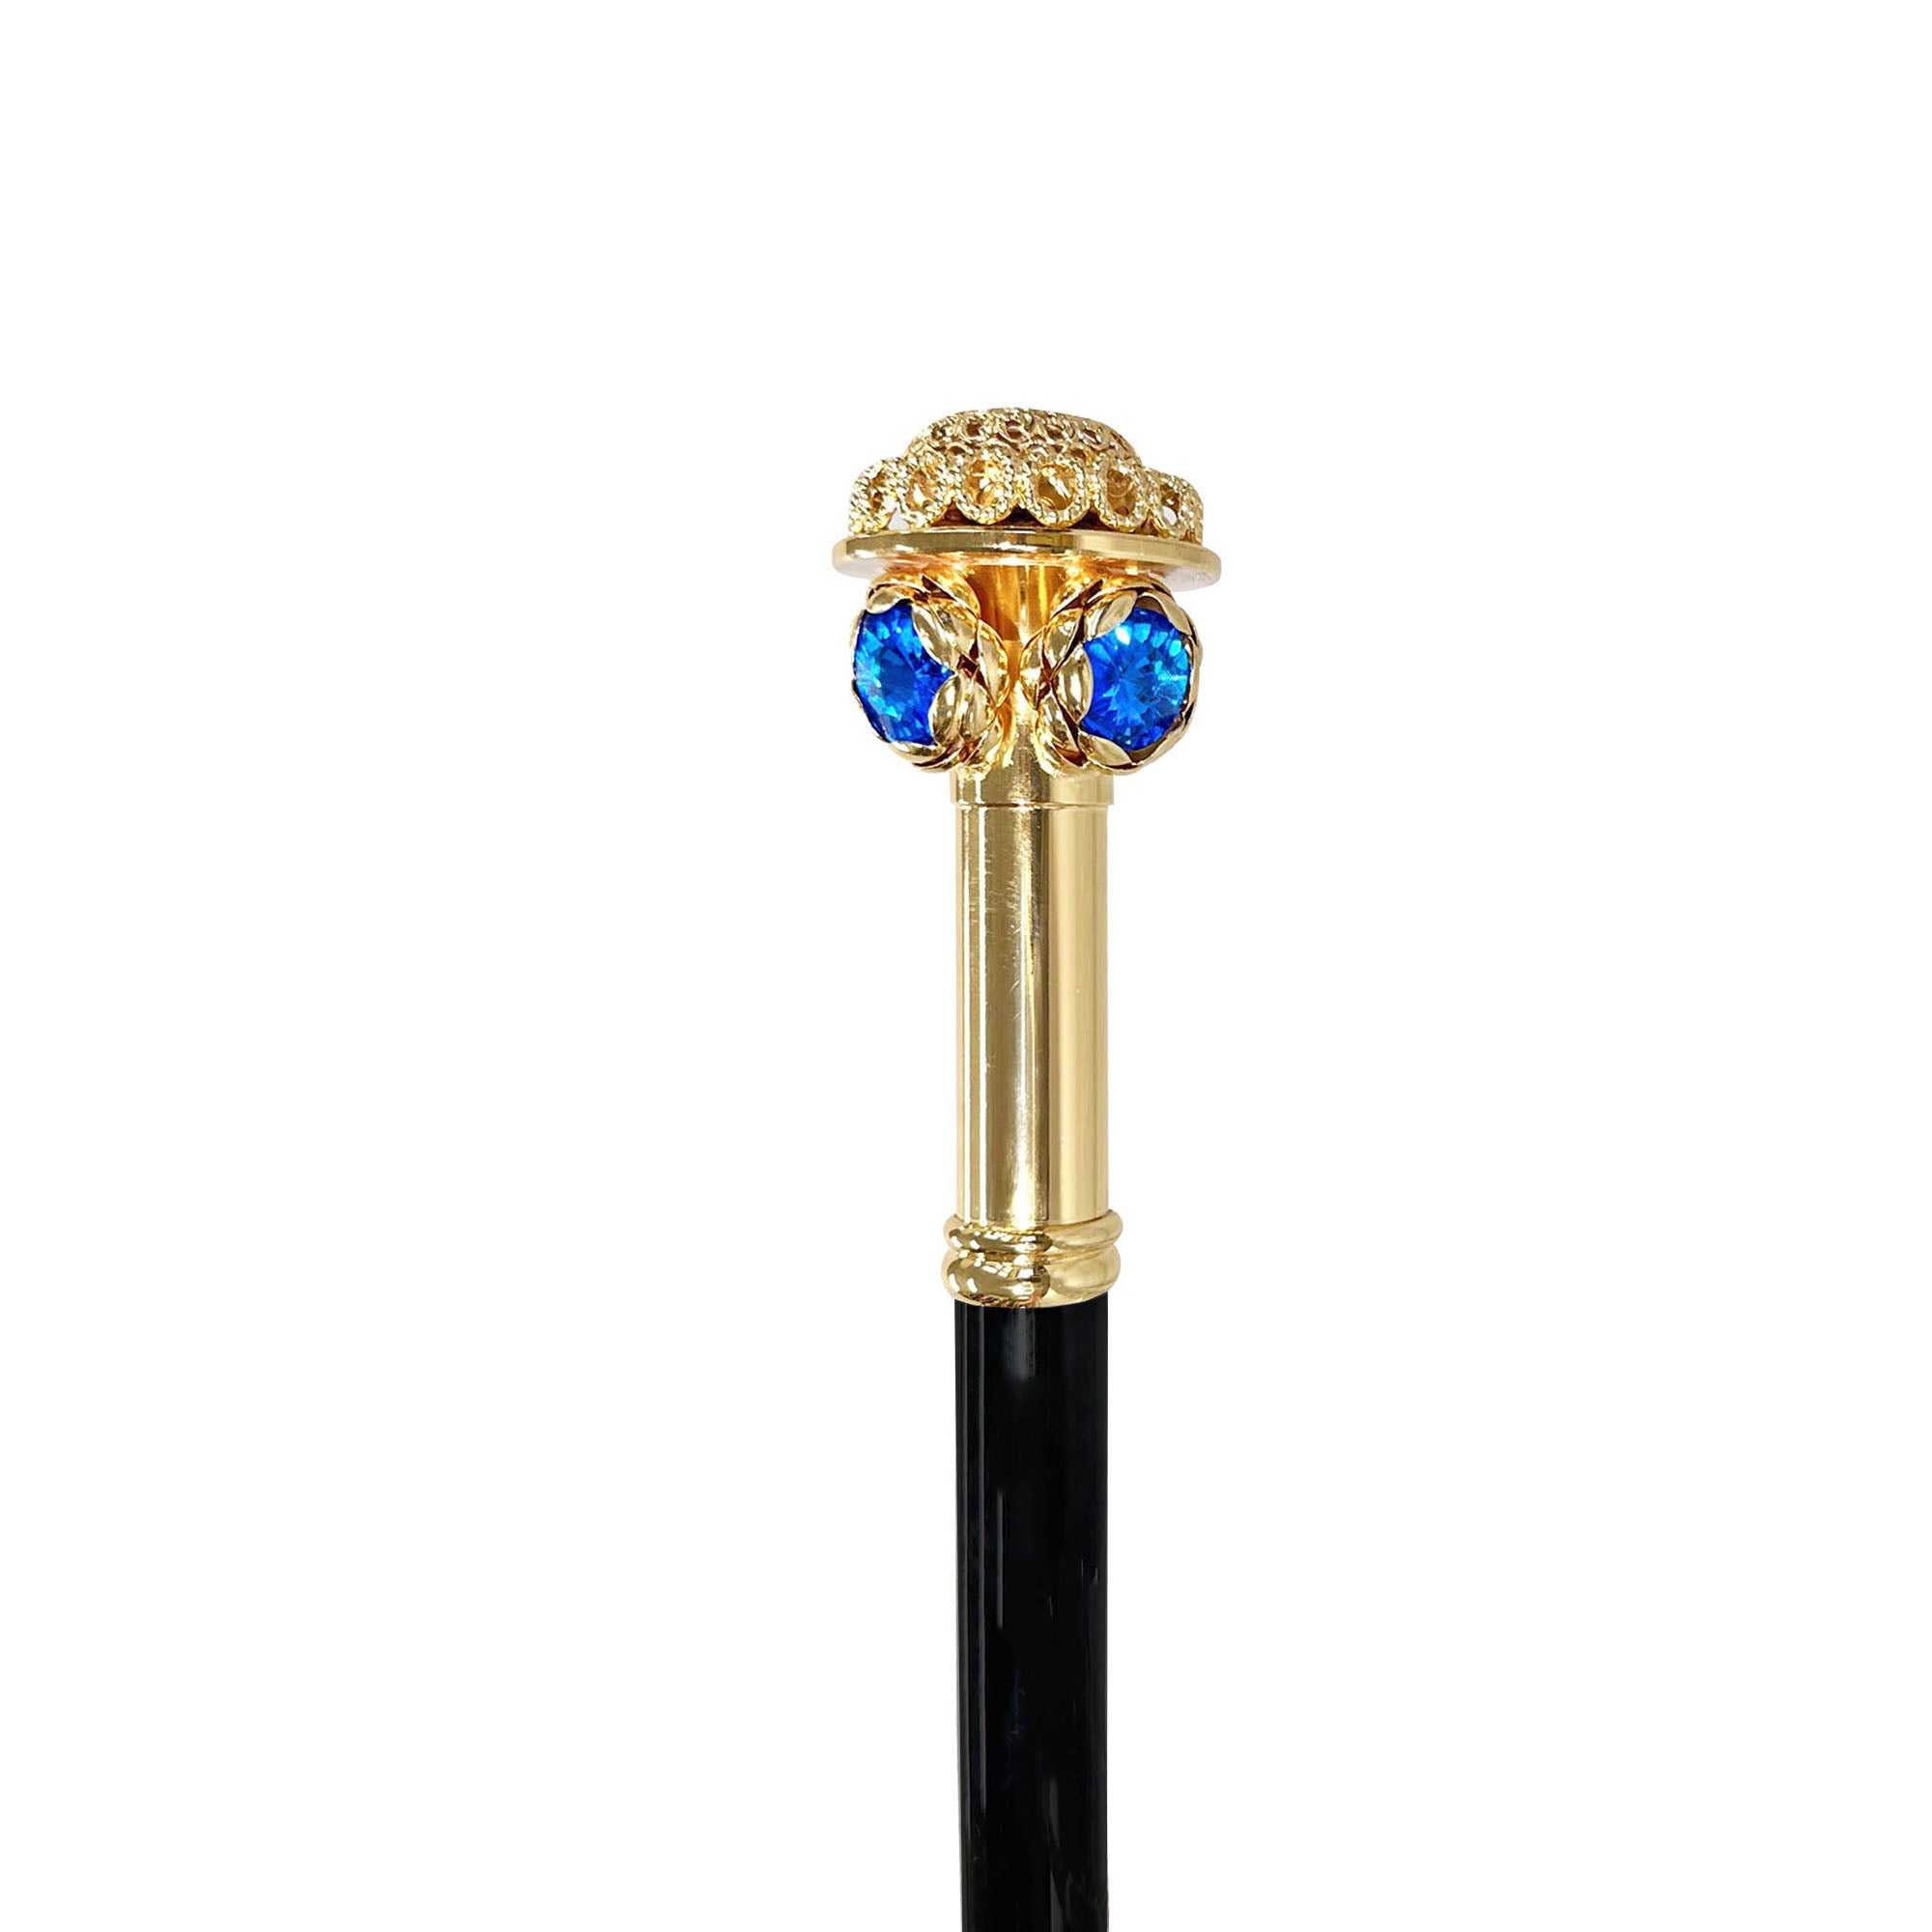 Walking stick with flower and "Capri" crystals